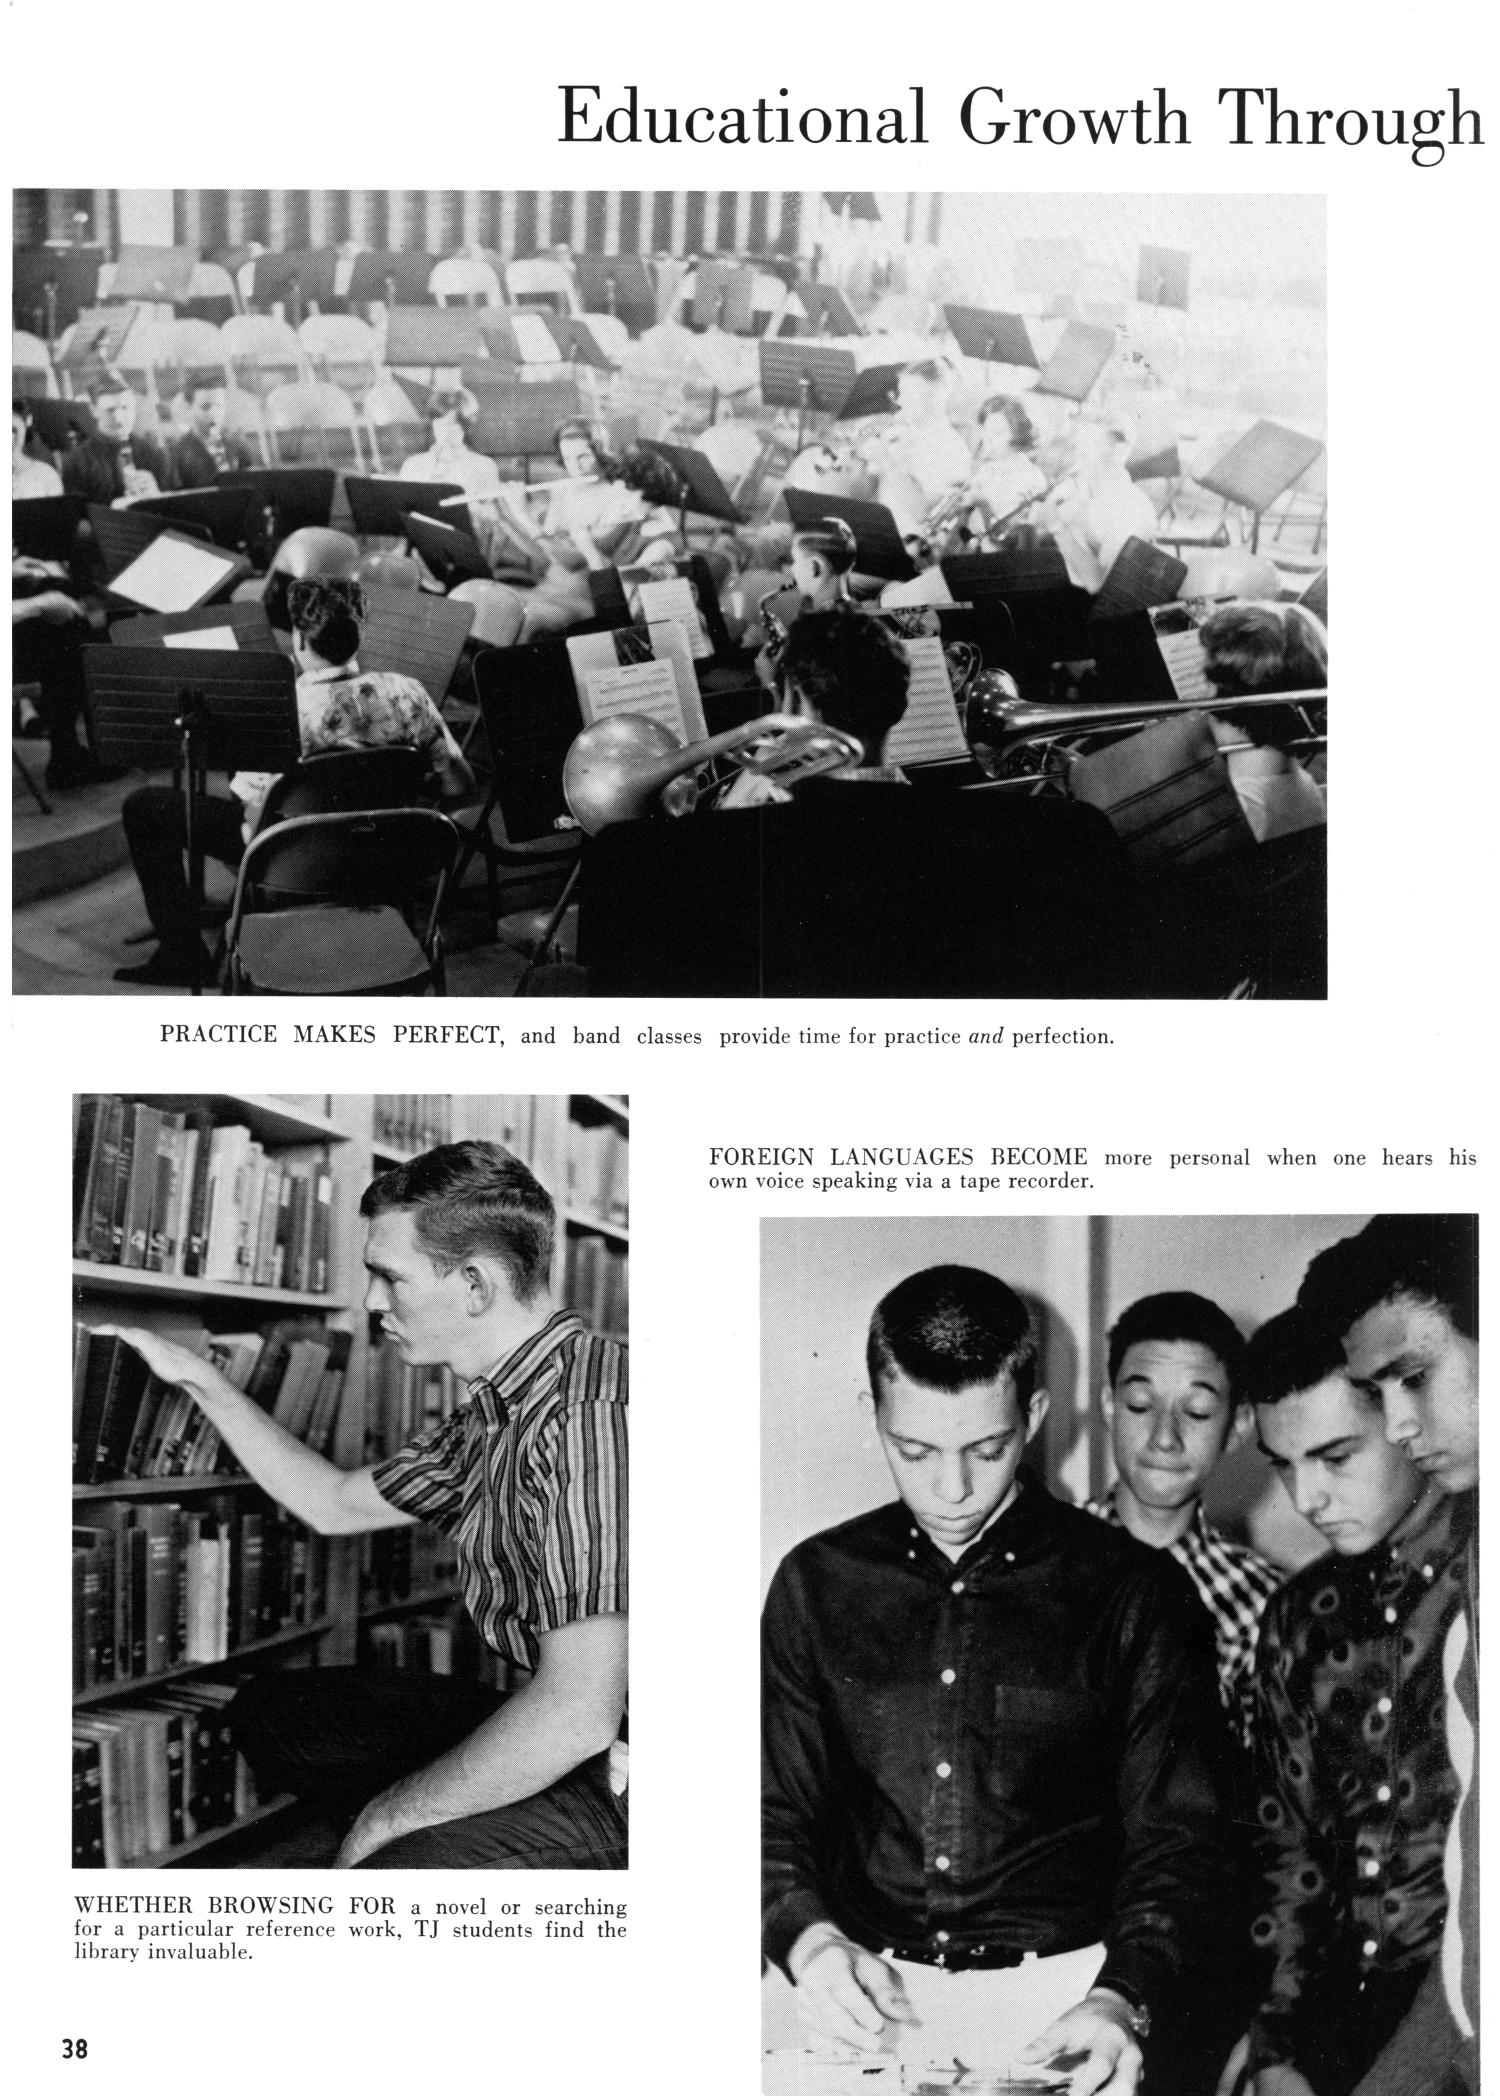 The Yellow Jacket, Yearbook of Thomas Jefferson High School, 1964
                                                
                                                    38
                                                